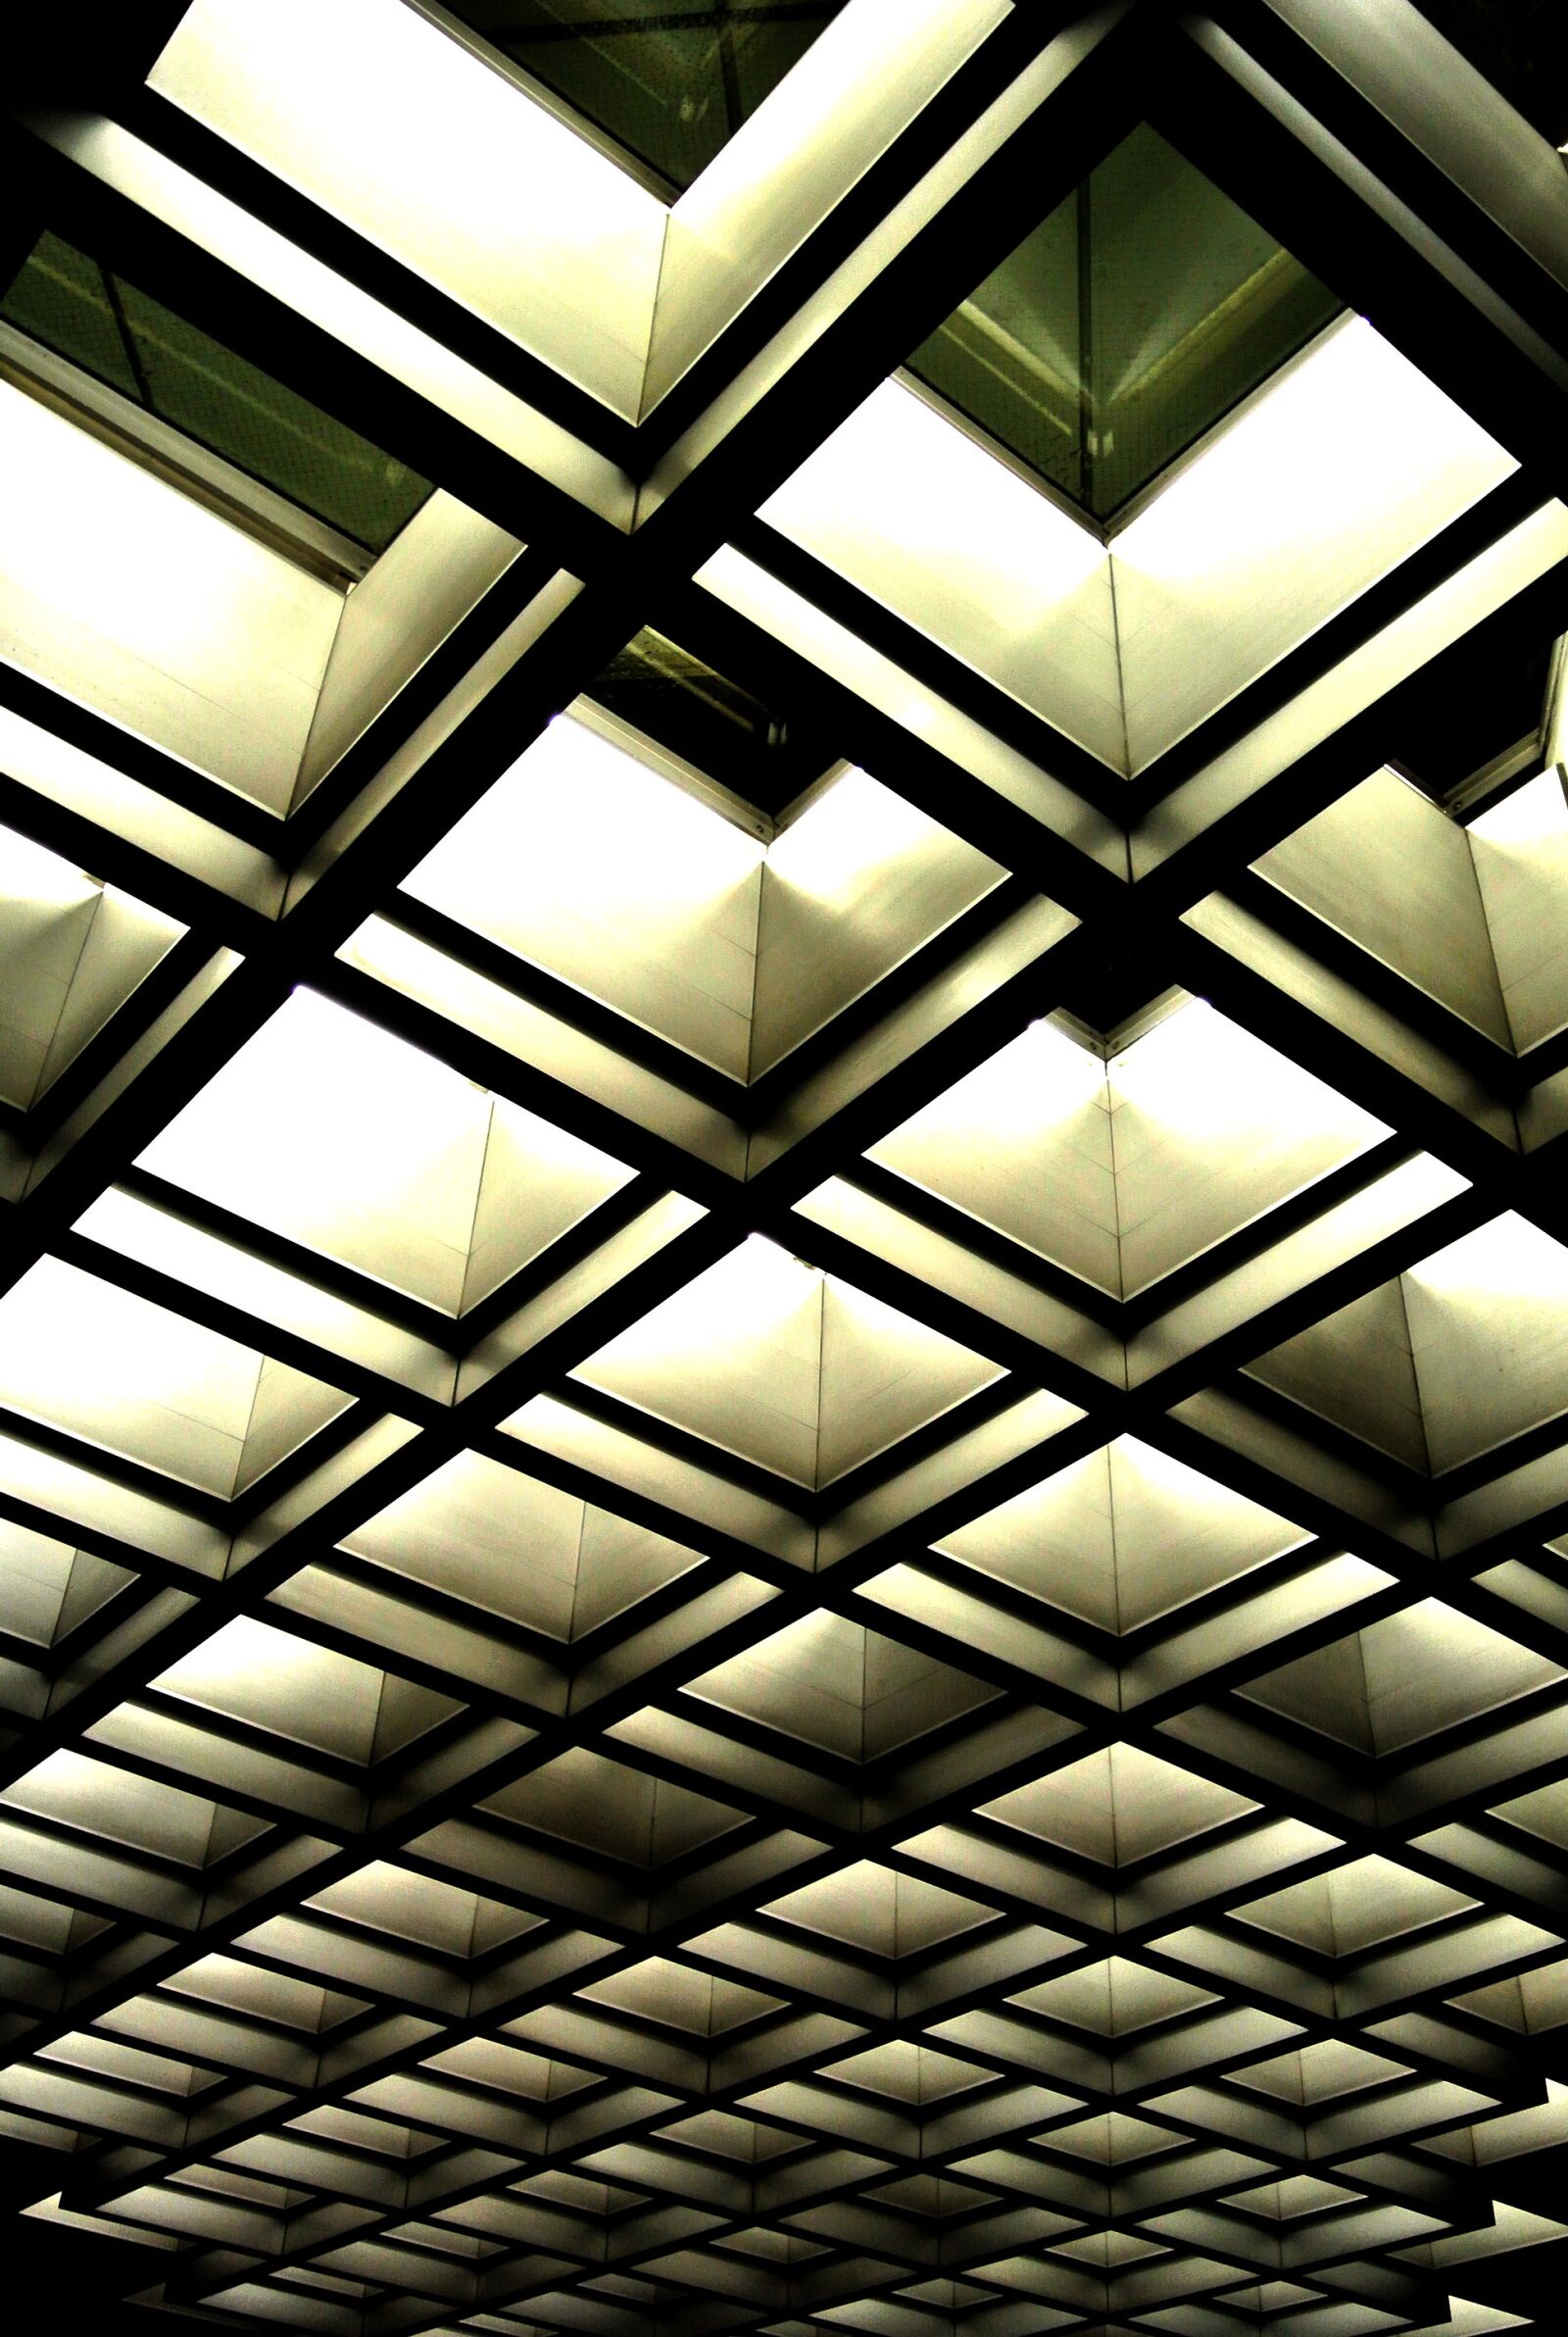 Nikon 1 J1 sample photo. Architecture, ceiling, abstract photography